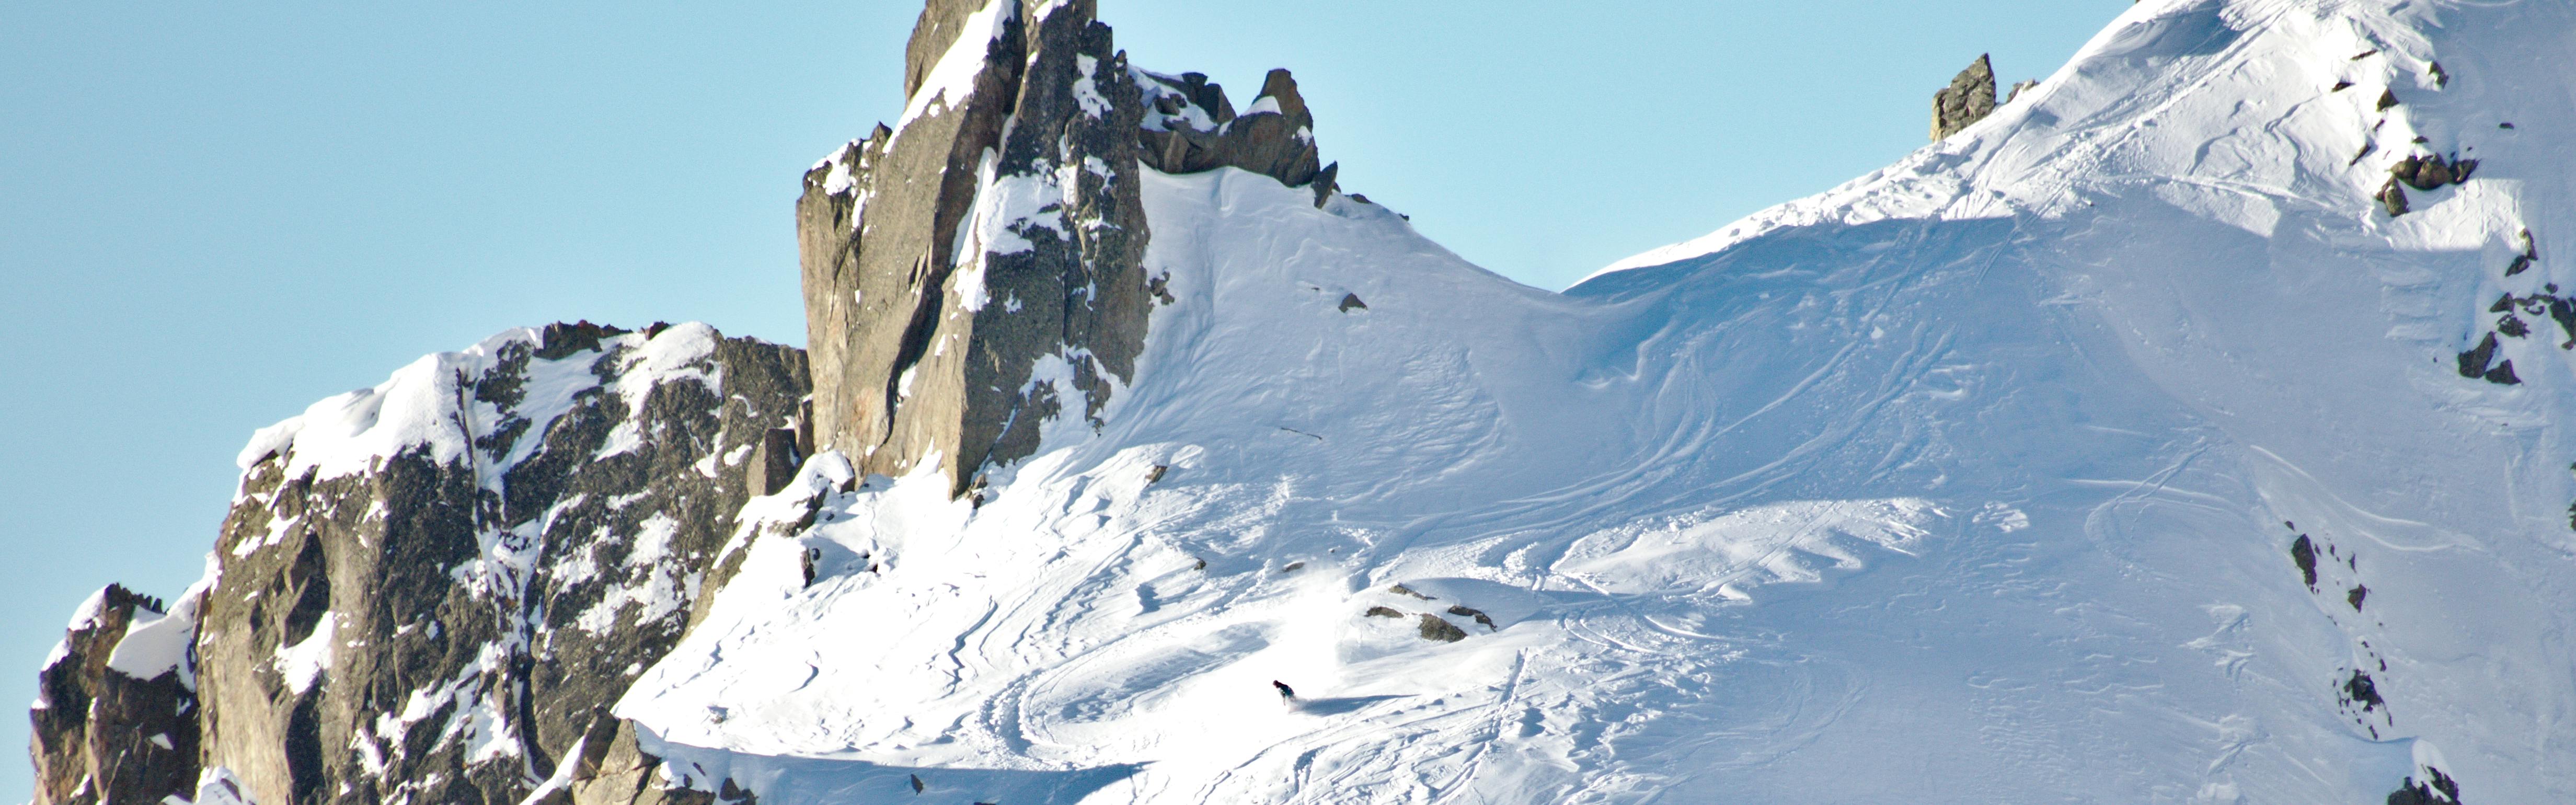 A skier skis at Chamonix in the 2014 Freeride World Tour on a bluebird day. 